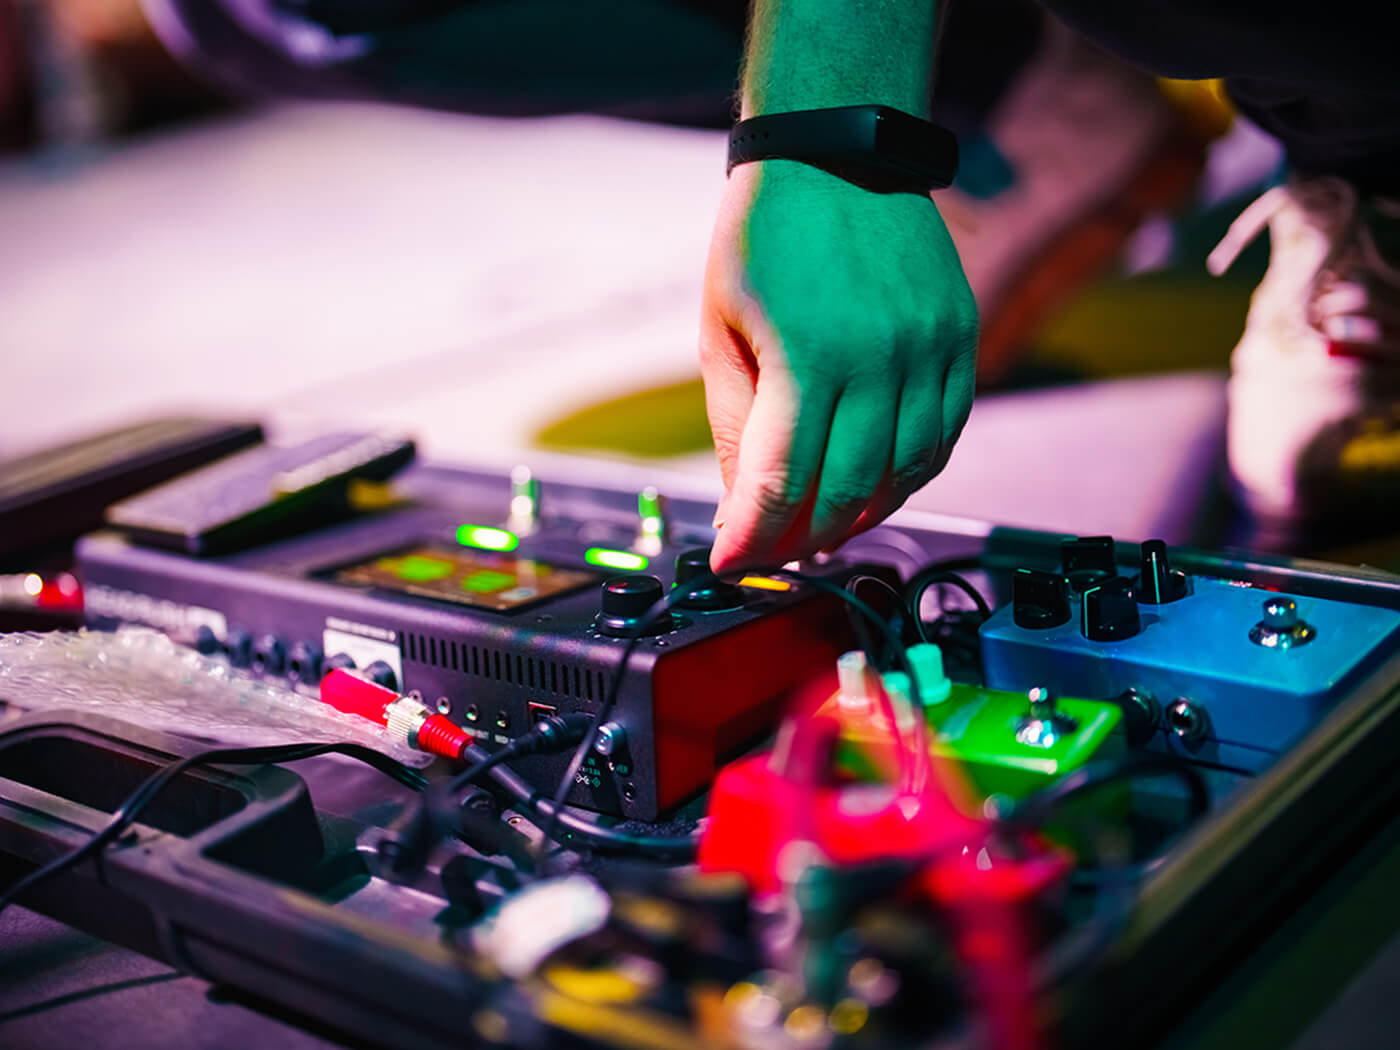 Musician adjusting guitar pedals on stage, photo by Ugur Karokac/Getty Images